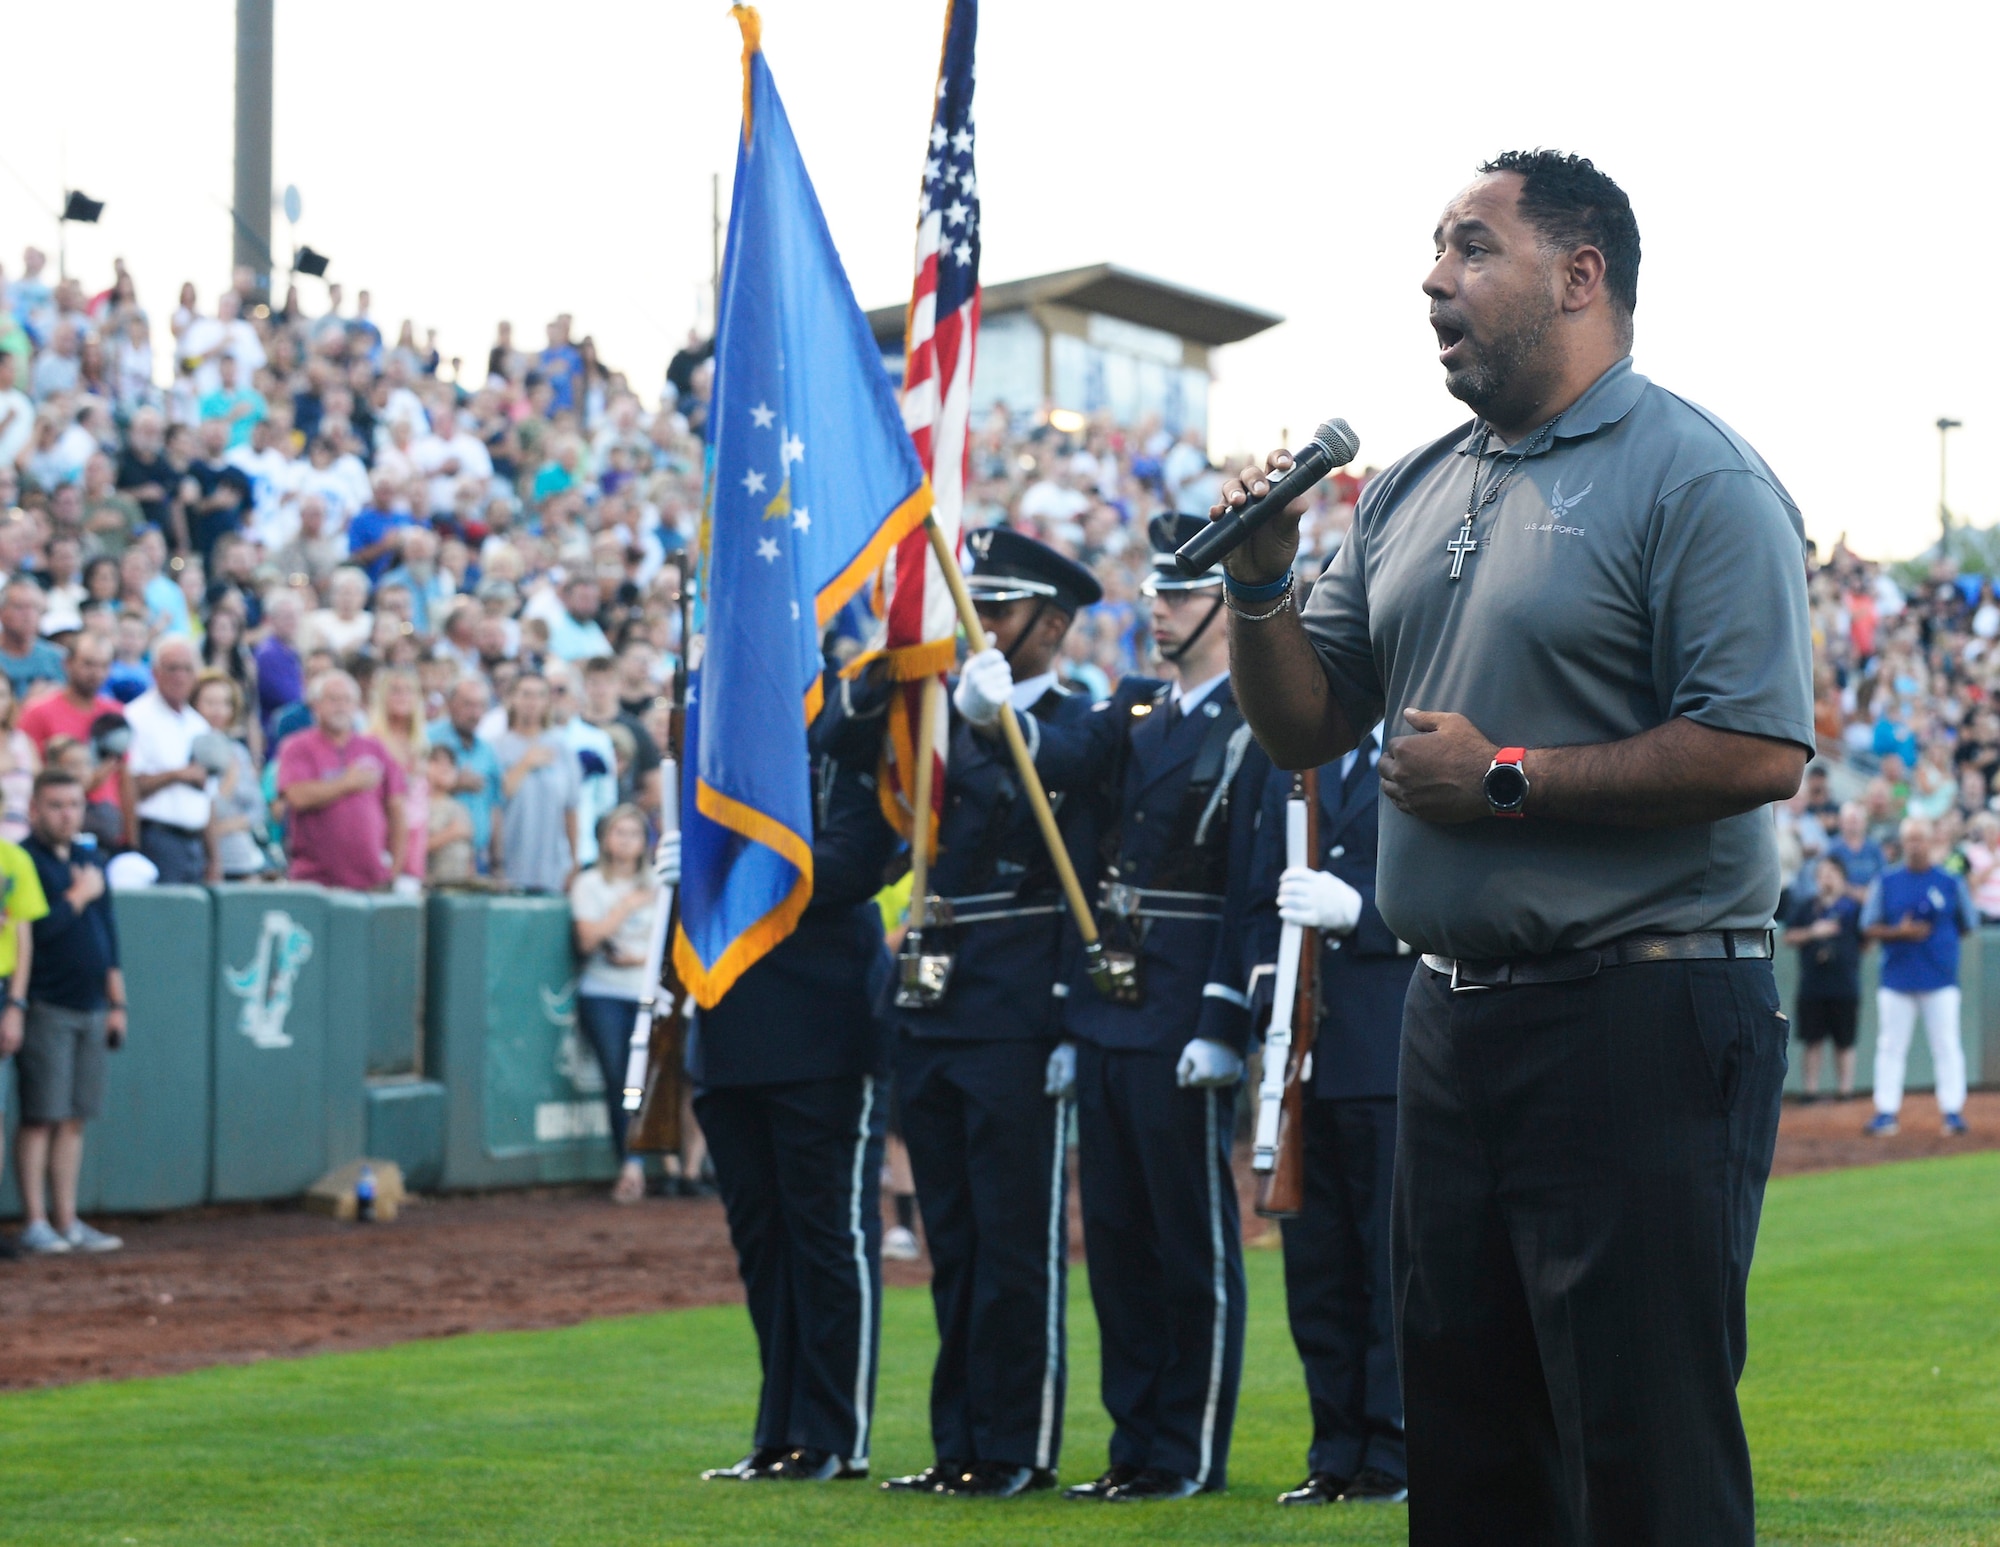 Retired Air Force Staff Sgt. De Andre Boyd sings the national anthem  Aug. 9, 2019, before Military Appreciation Night with the Ogden Raptors and Idaho Falls Chuckars at Lindquist Field in Ogden, Utah. Each year, the Raptors team up with the Top of Utah Military Affairs Committee to offer tickets to Hill Air Force Base personnel and their families. (U.S. Air Force photo by David Perry)